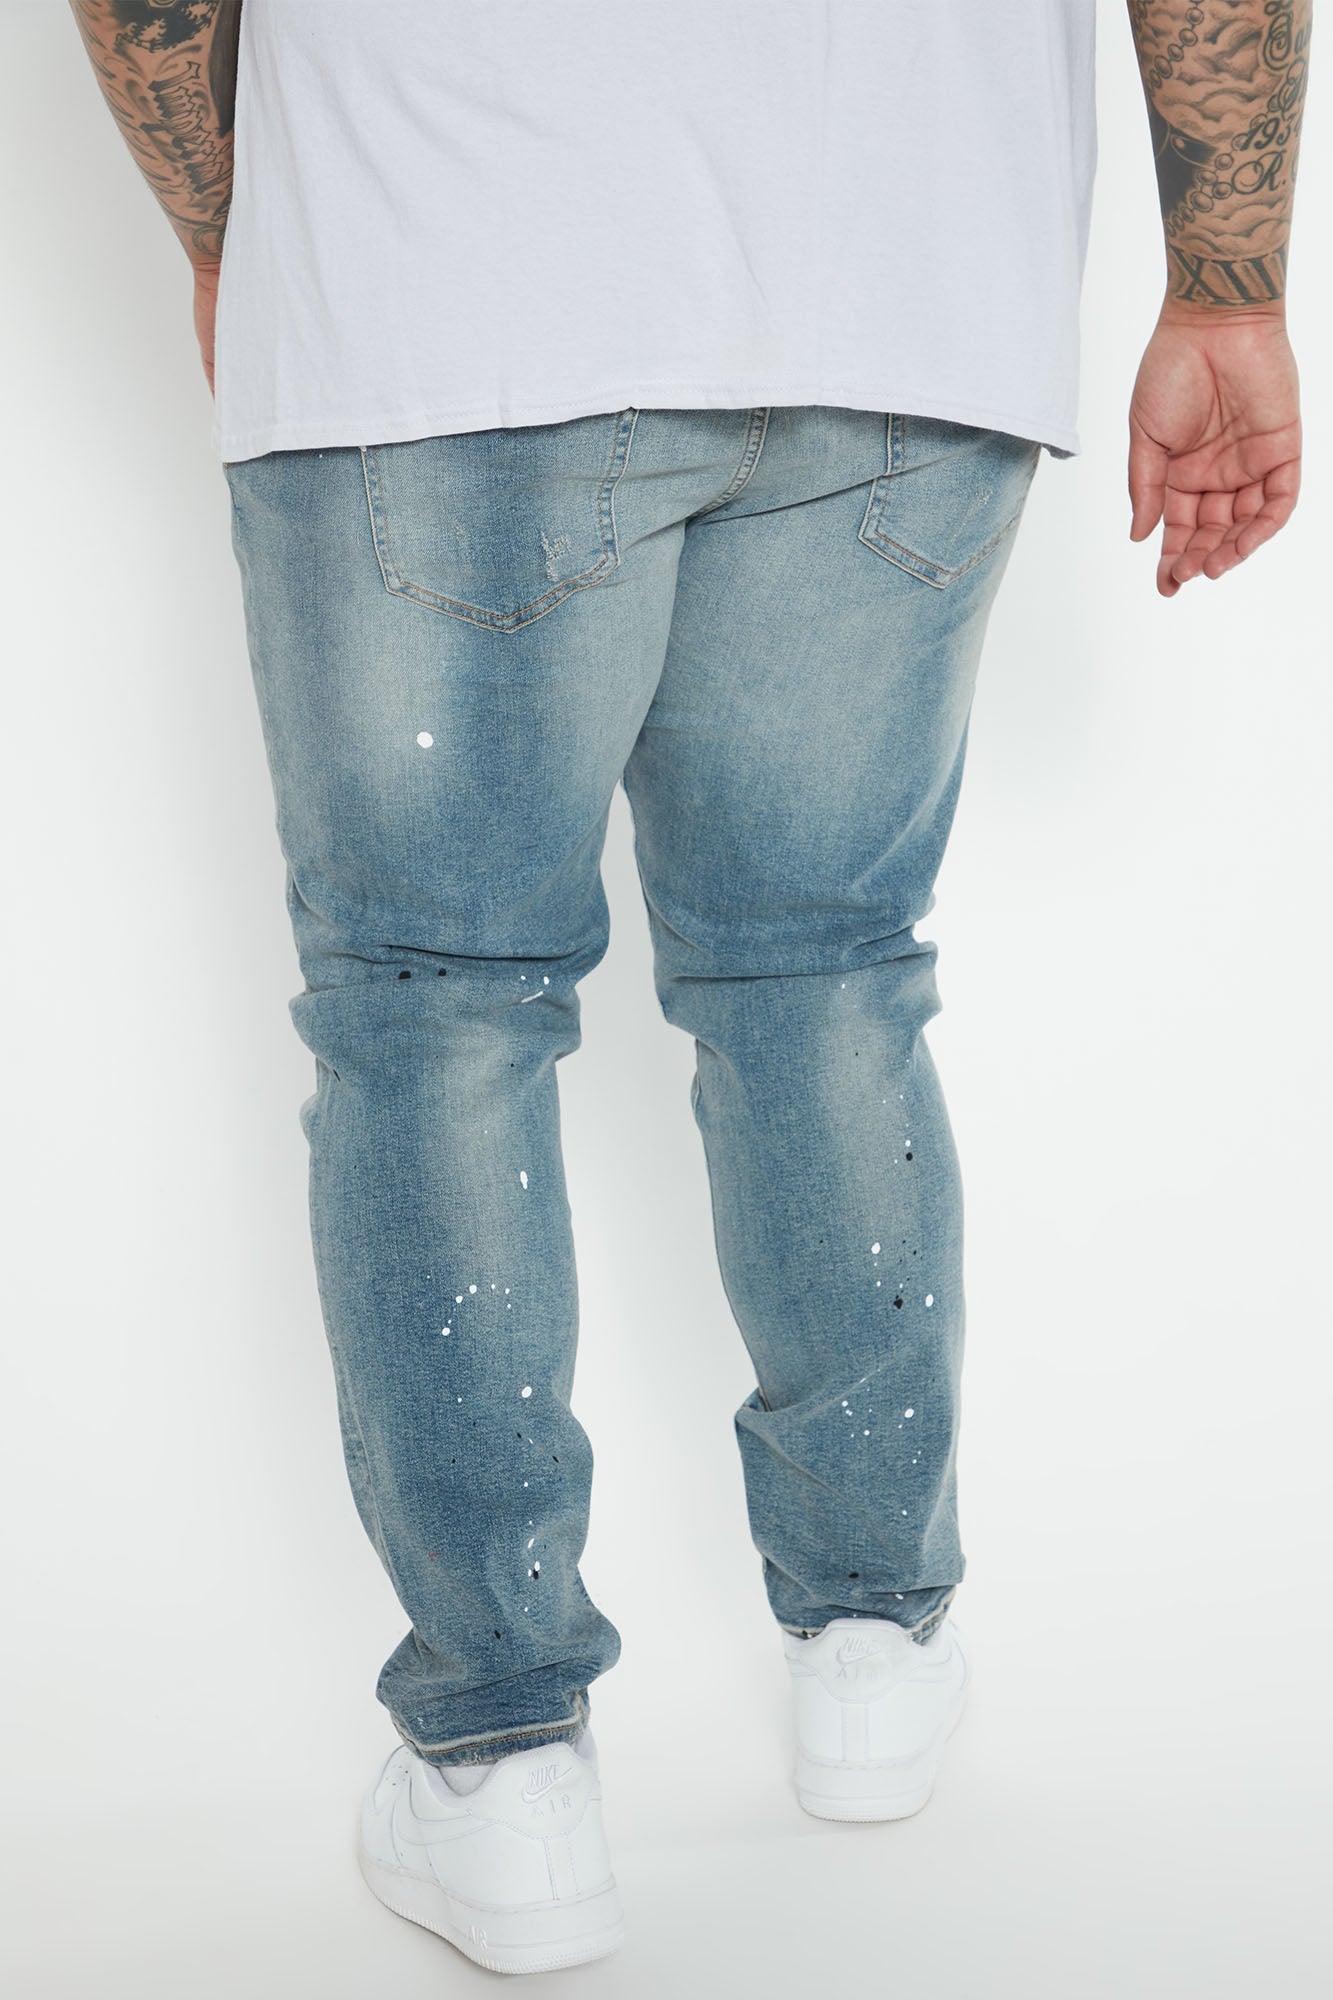 Edgy and Trendy: Ripped and Bleach Splatter Slim Jeans in Light Blue Wash